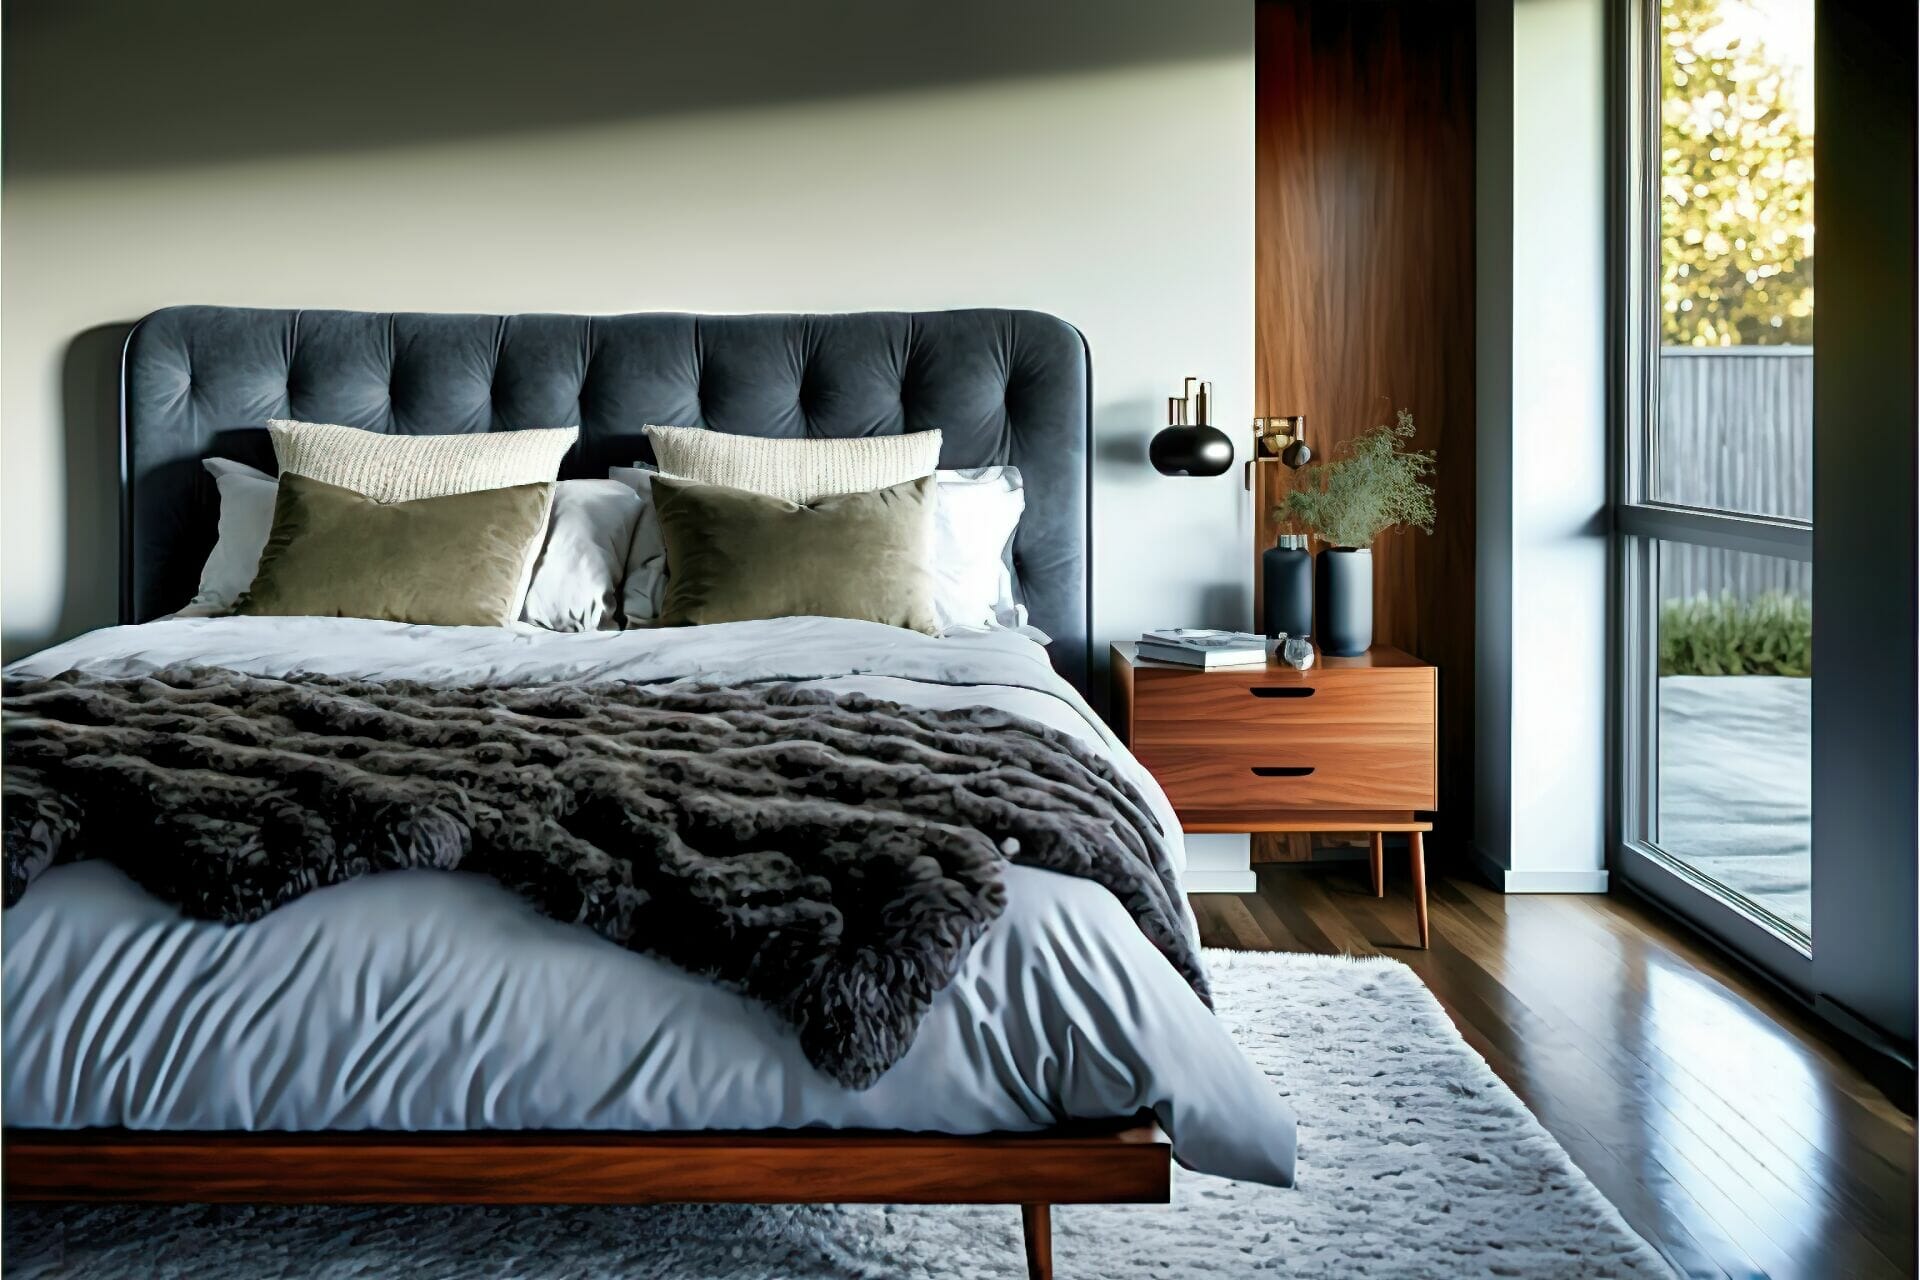 Mid-Century Modern Bedroom – A Sophisticated Modern Bedroom Featuring A Low-Profile Bed Frame With A Velvet Headboard, A Wood And Metal Nightstand, And A Gray Shaggy Area Rug.